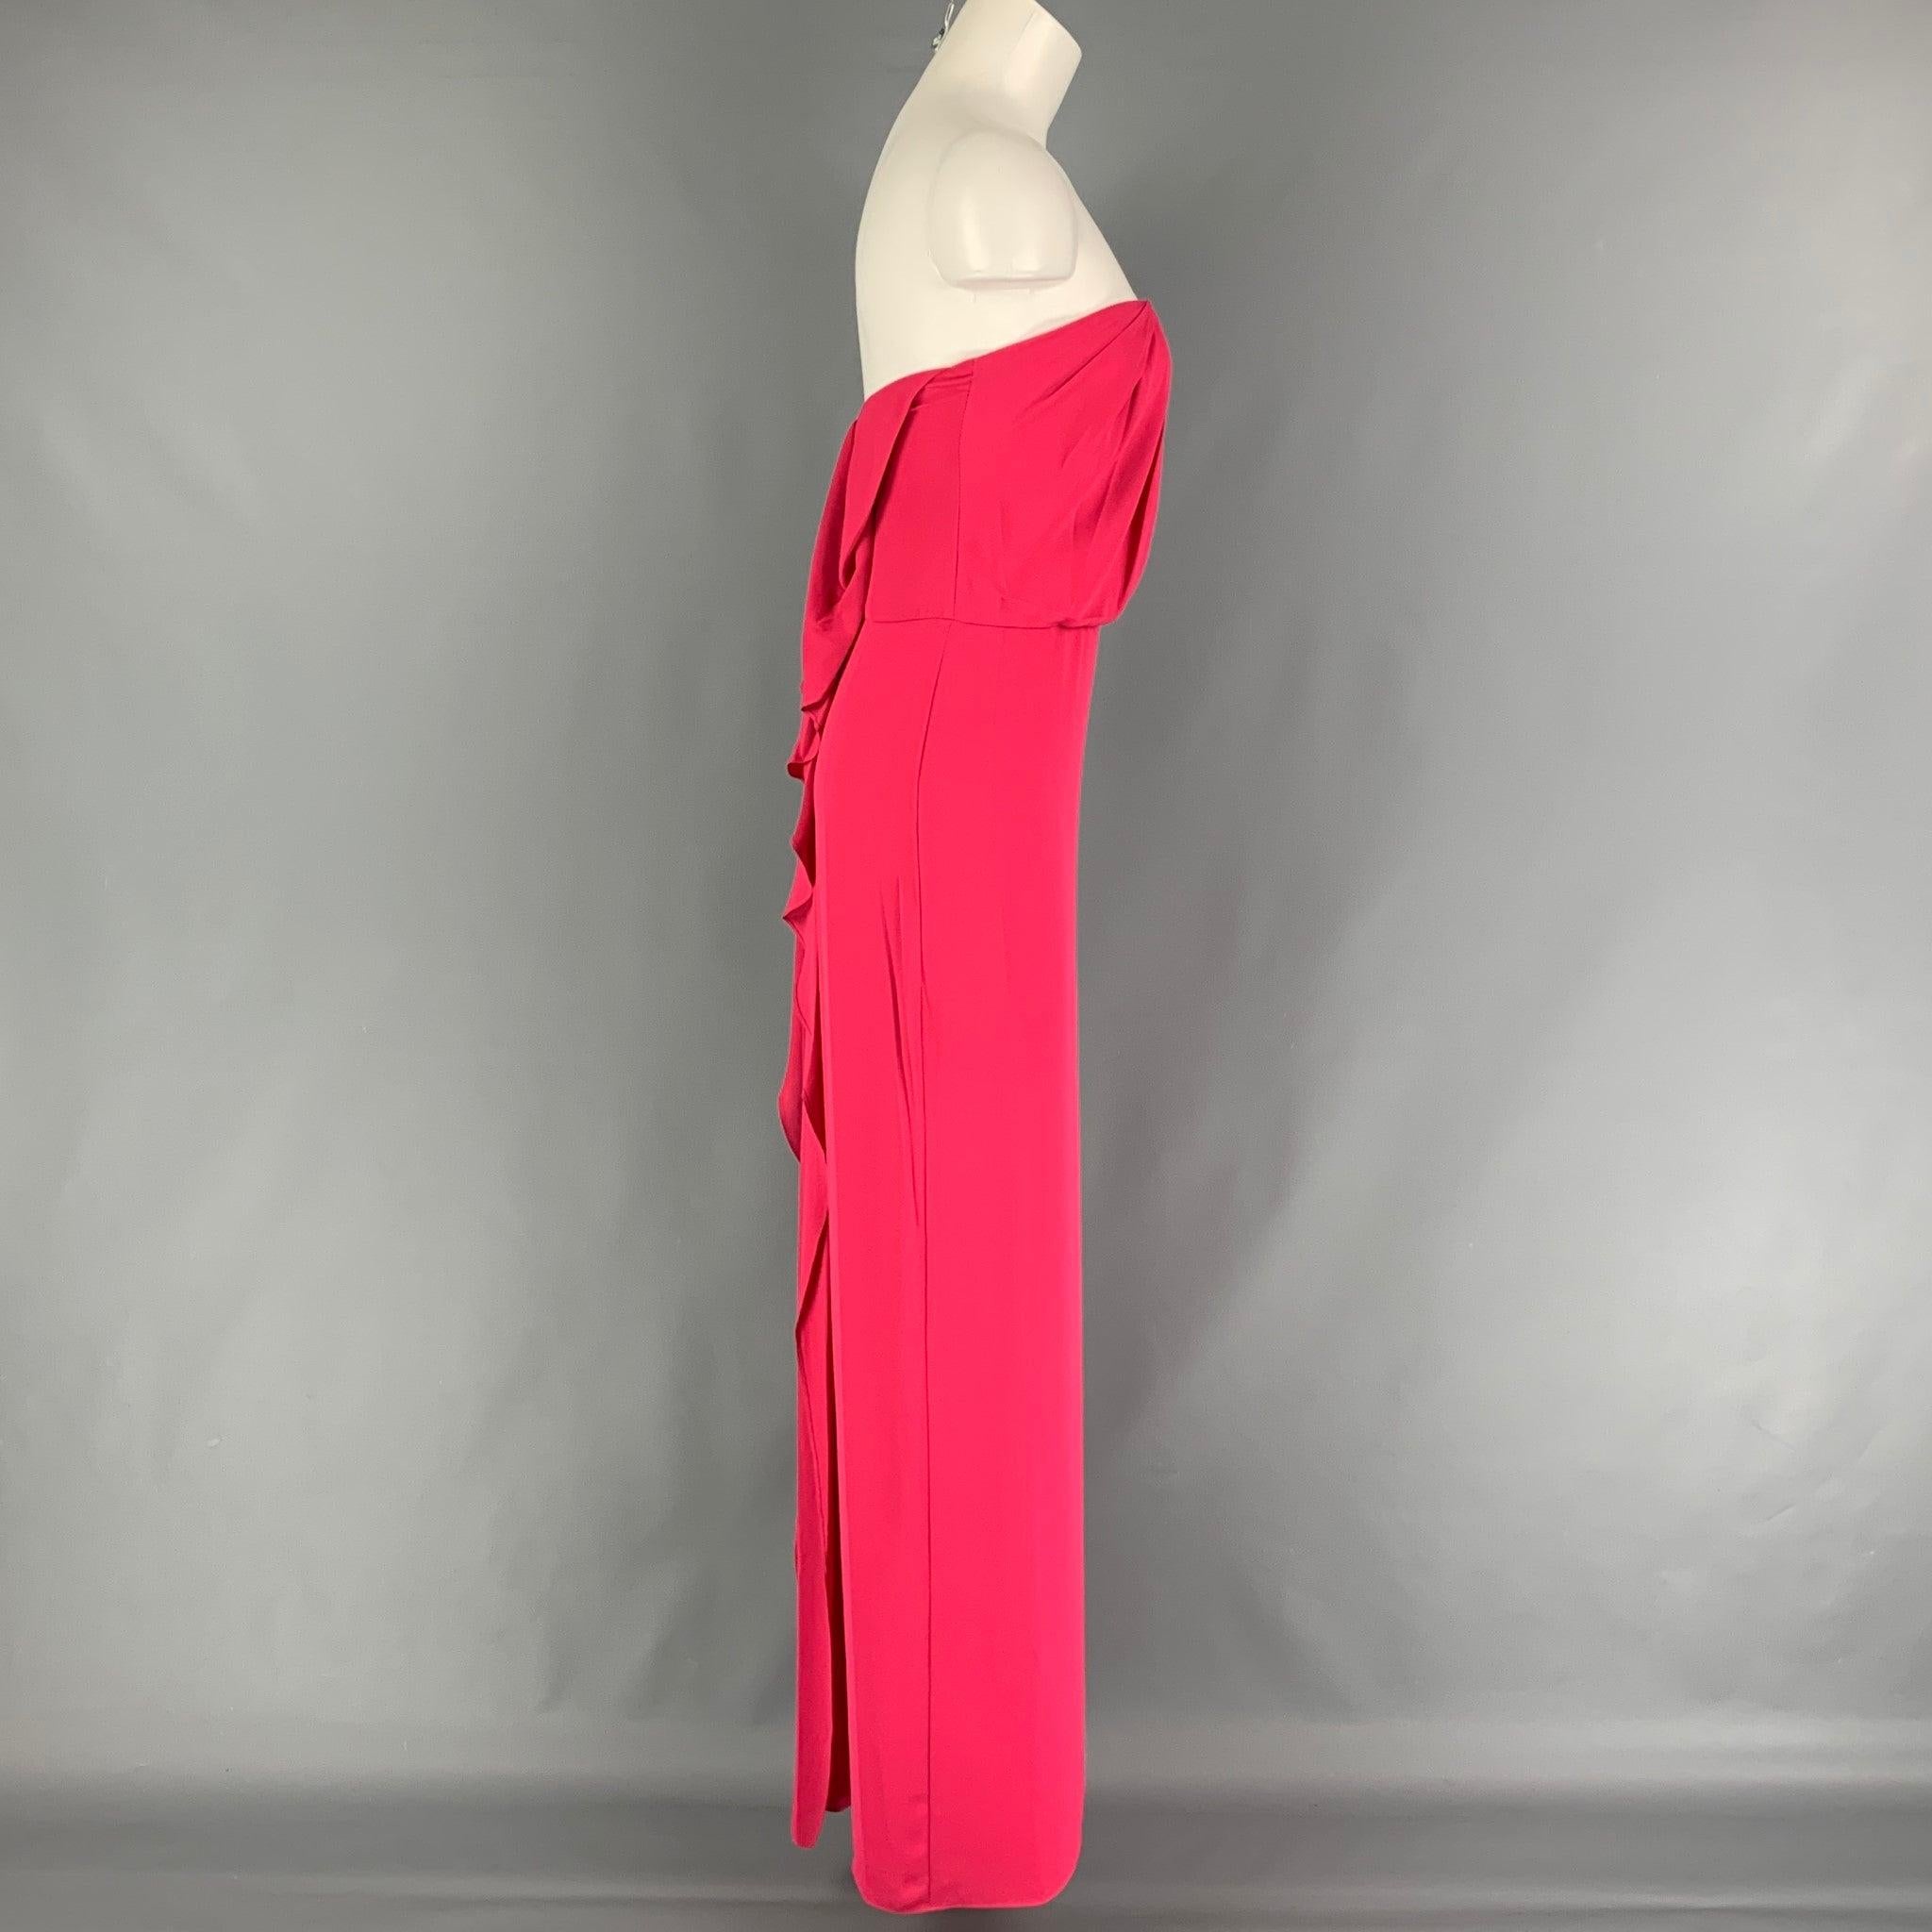 HALSTON HERITAGE dress comes in a pink polyester featuring a strapless style, high side slit, cascading drape detail, inner bustier, and a back zip up closure.
New With Tags.
 

Marked:   0 

Measurements: 
  Bust: 27 inches  Waist: 24 inches Hip: